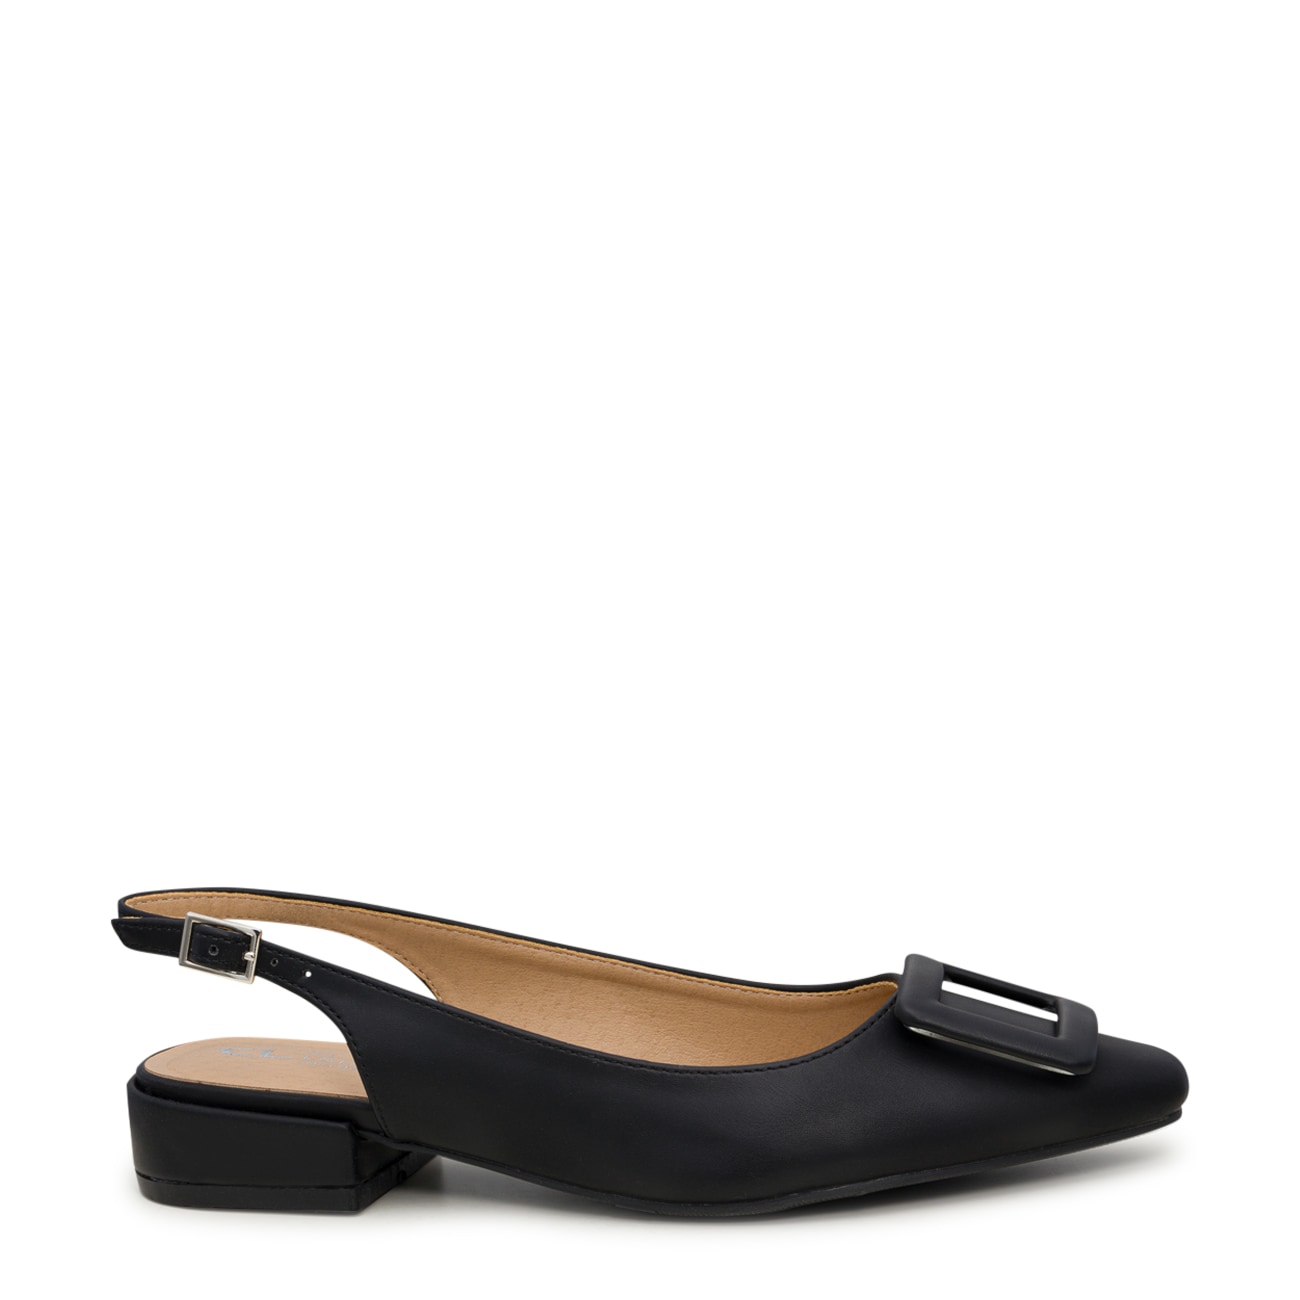 CL by Laundry Sweetie Slingback Flat | The Shoe Company